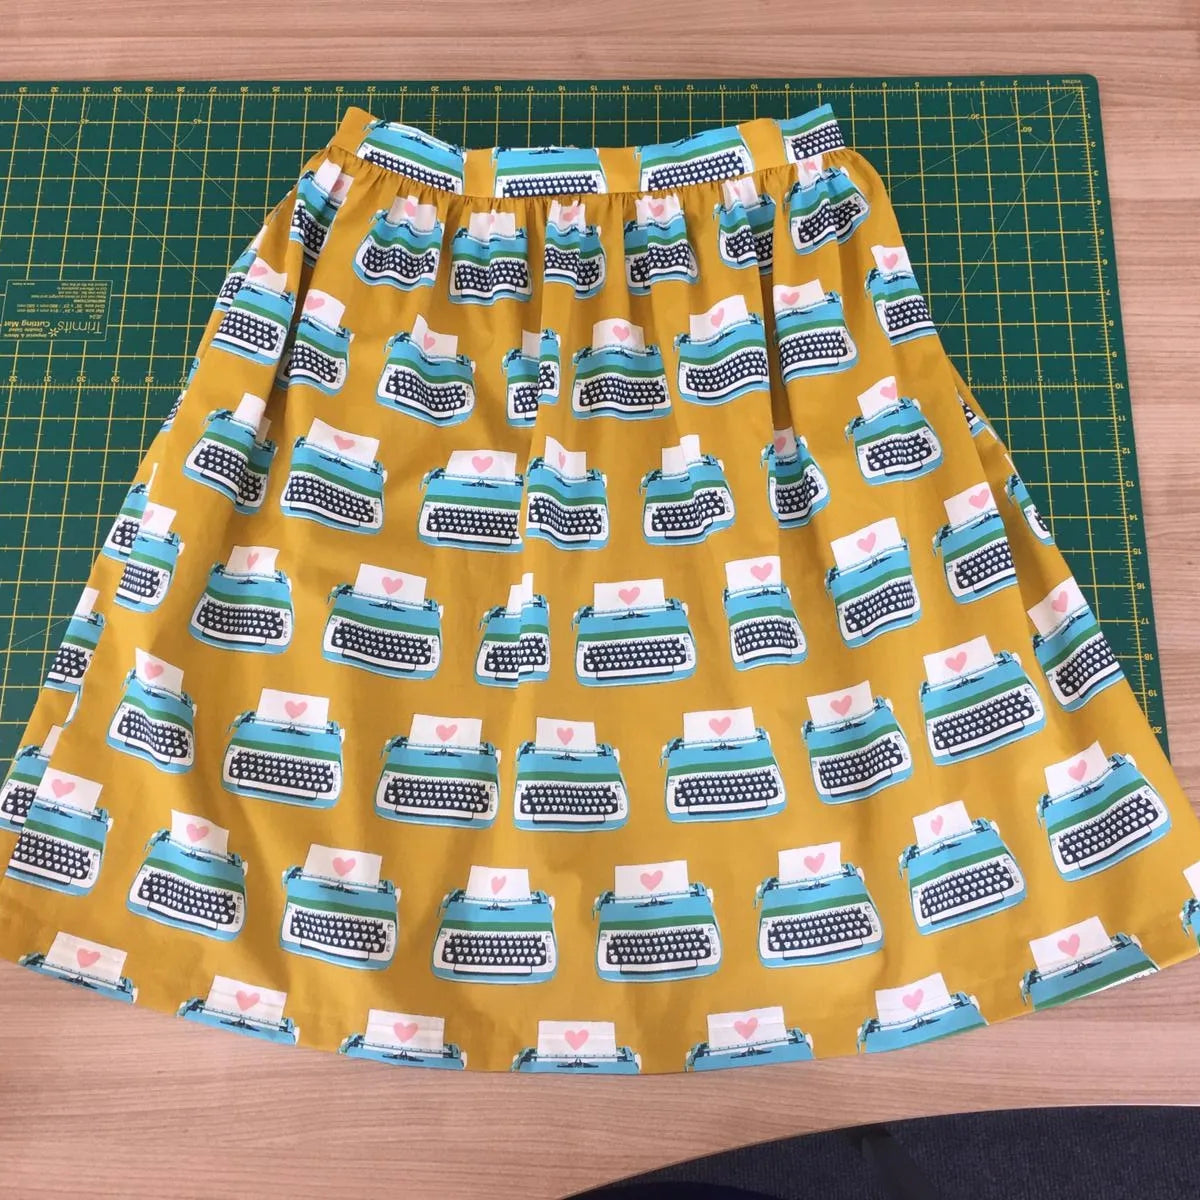 Sew Your Own Skirt With Kym - Sunday 14th July